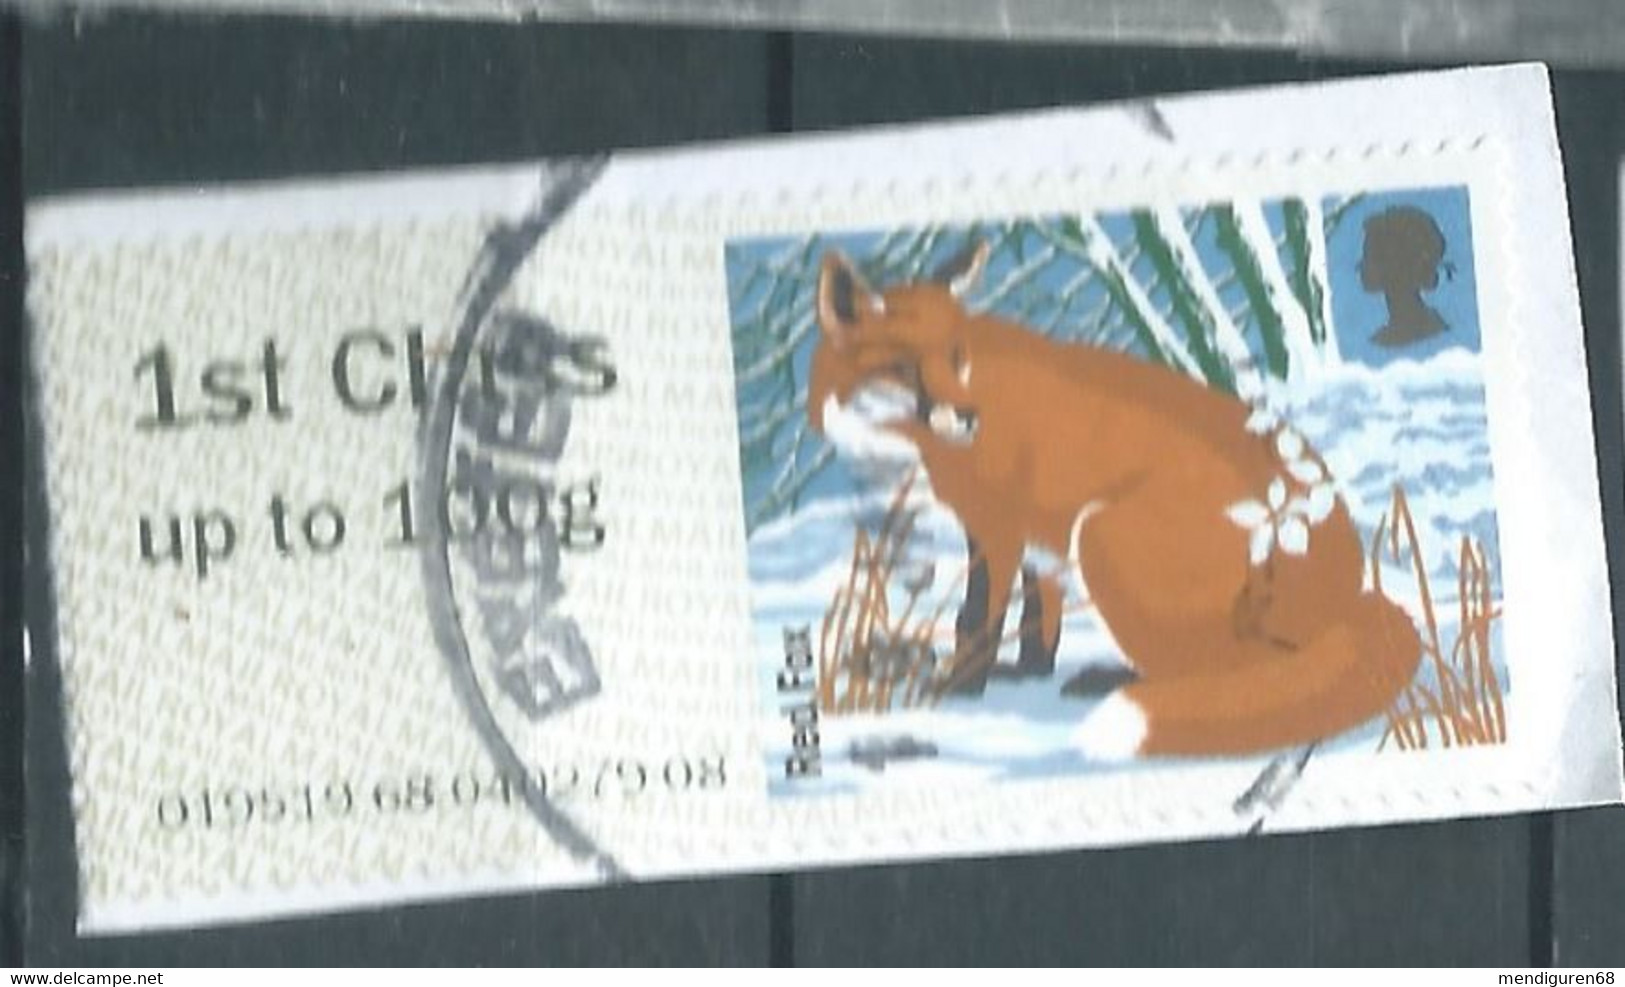 GROSBRITANNIEN GRANDE BRETAGNE GB POST&GO 2015 WINTER FUR AND FEATHERS:RED FOX 1ST CLASS Up To 100g PAPER SG FS145 - Post & Go Stamps